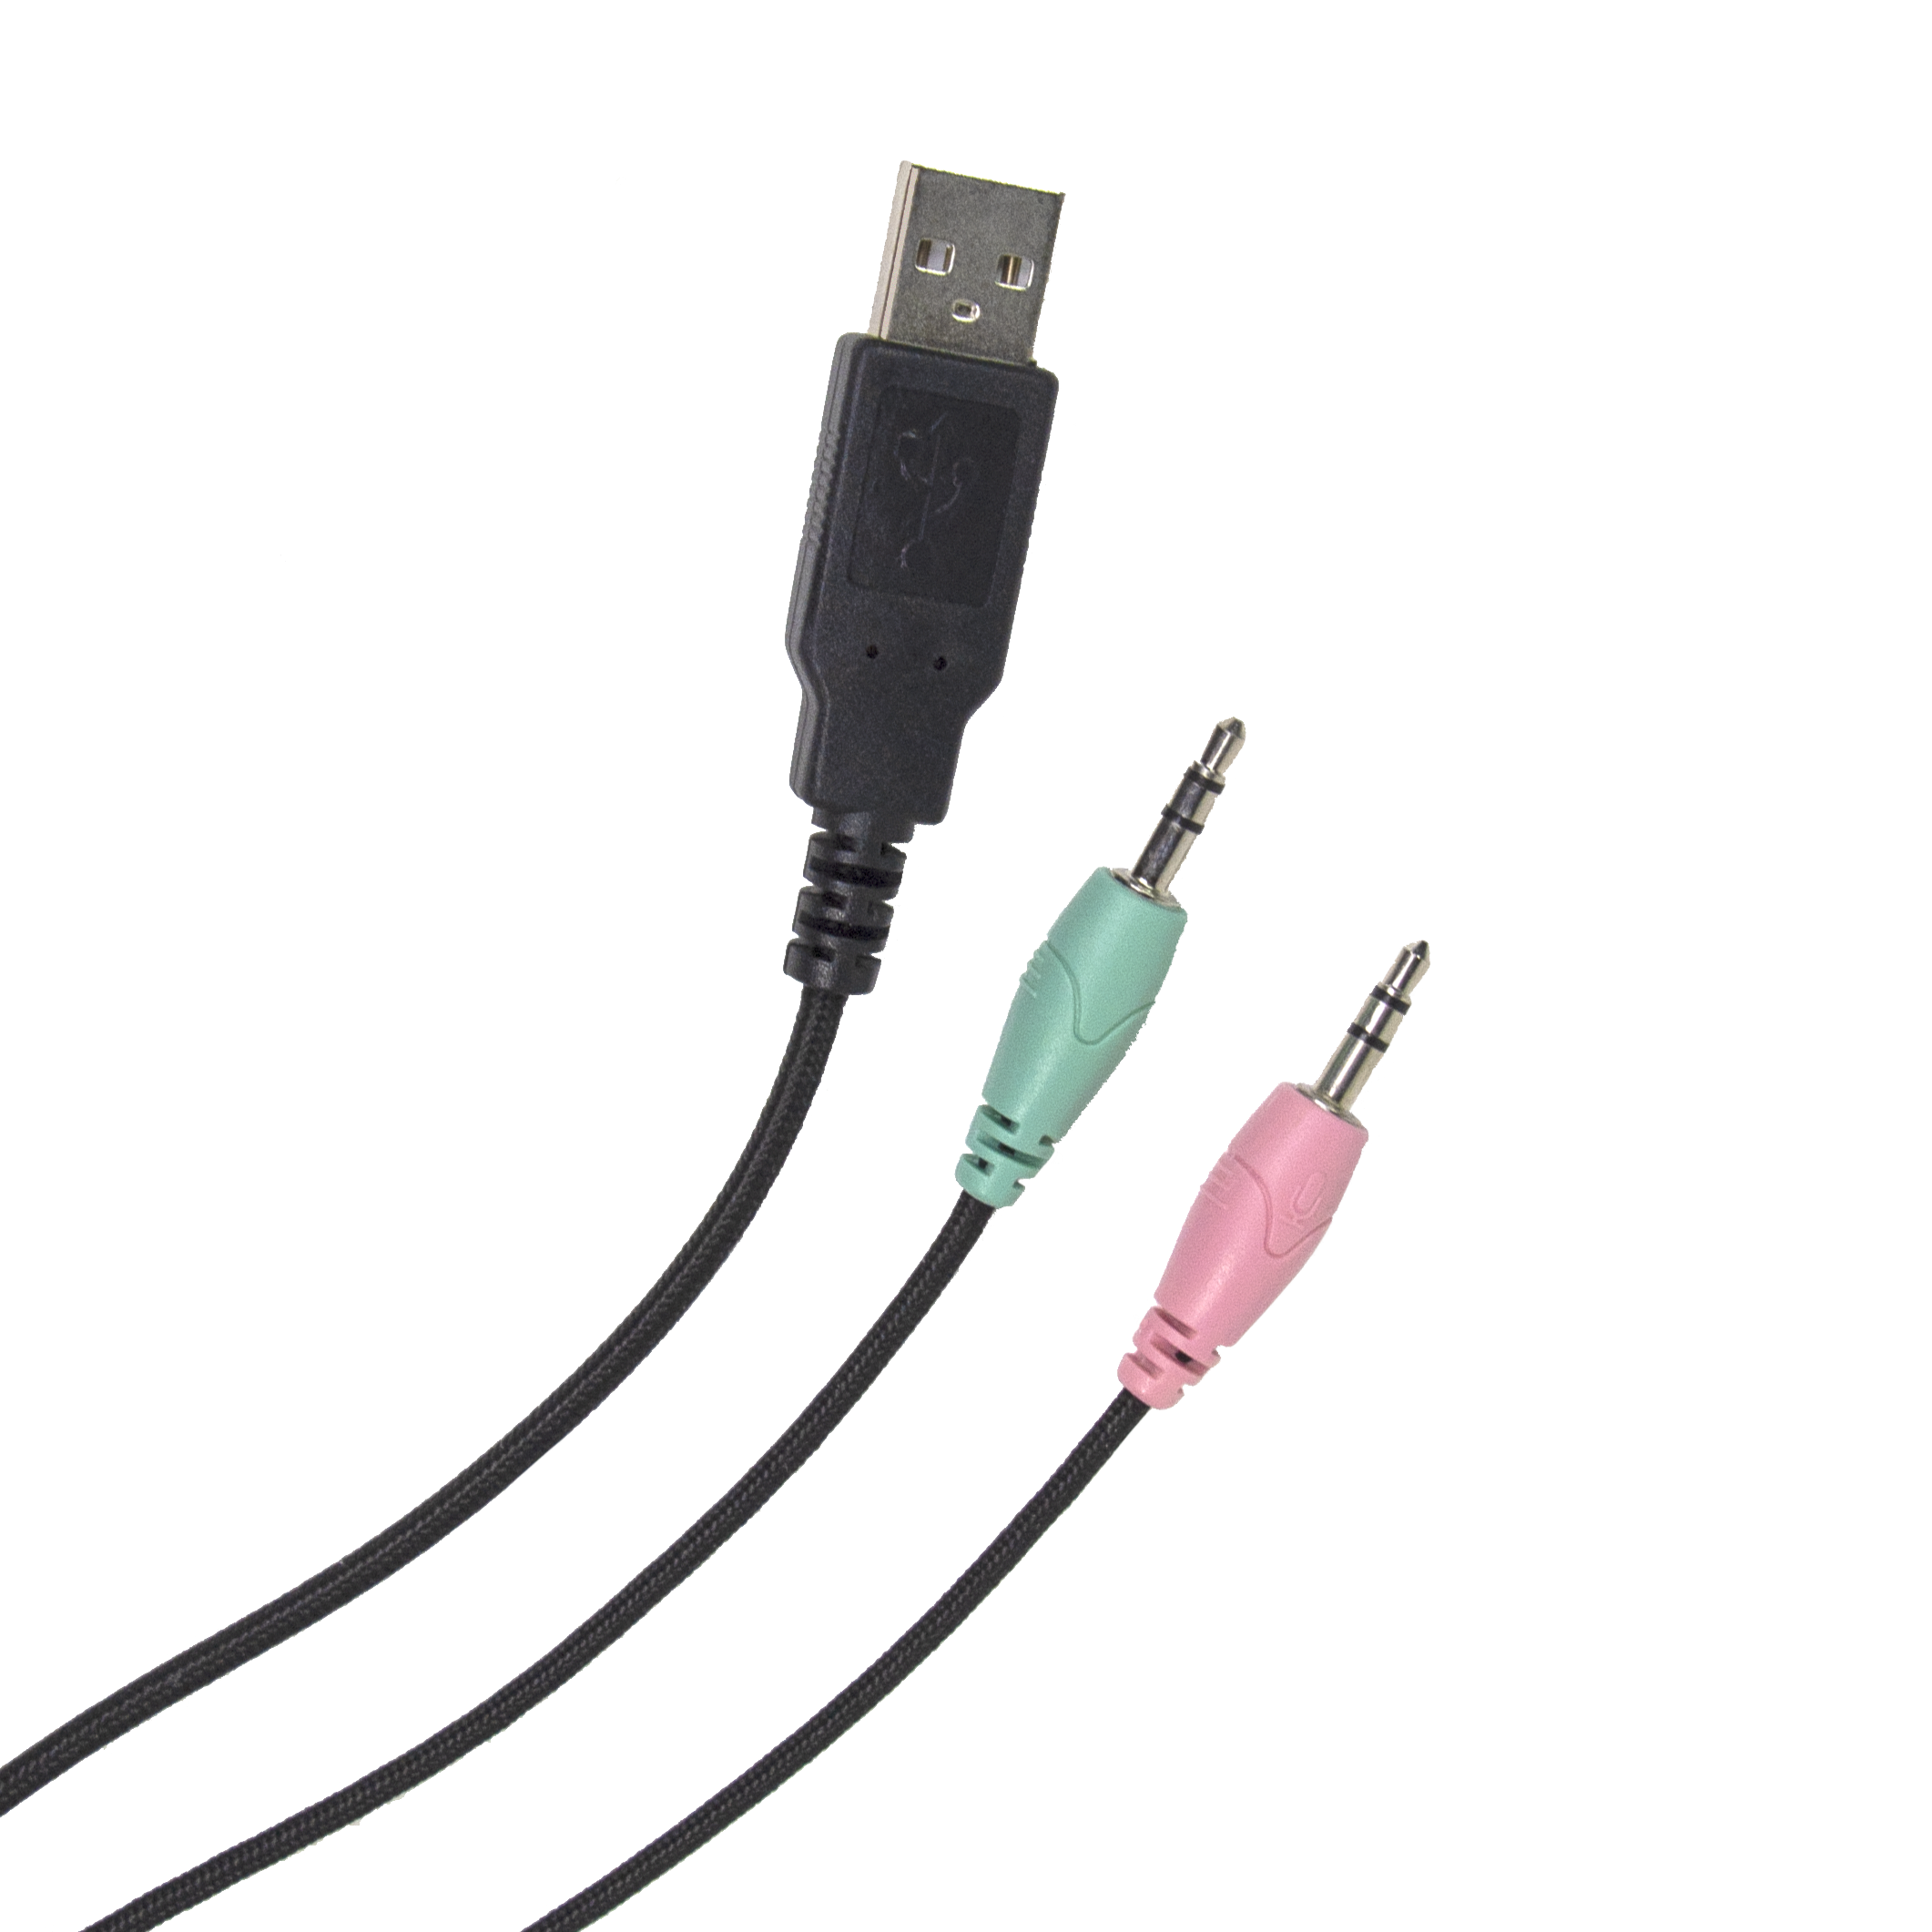 Close-up image of the connector cables